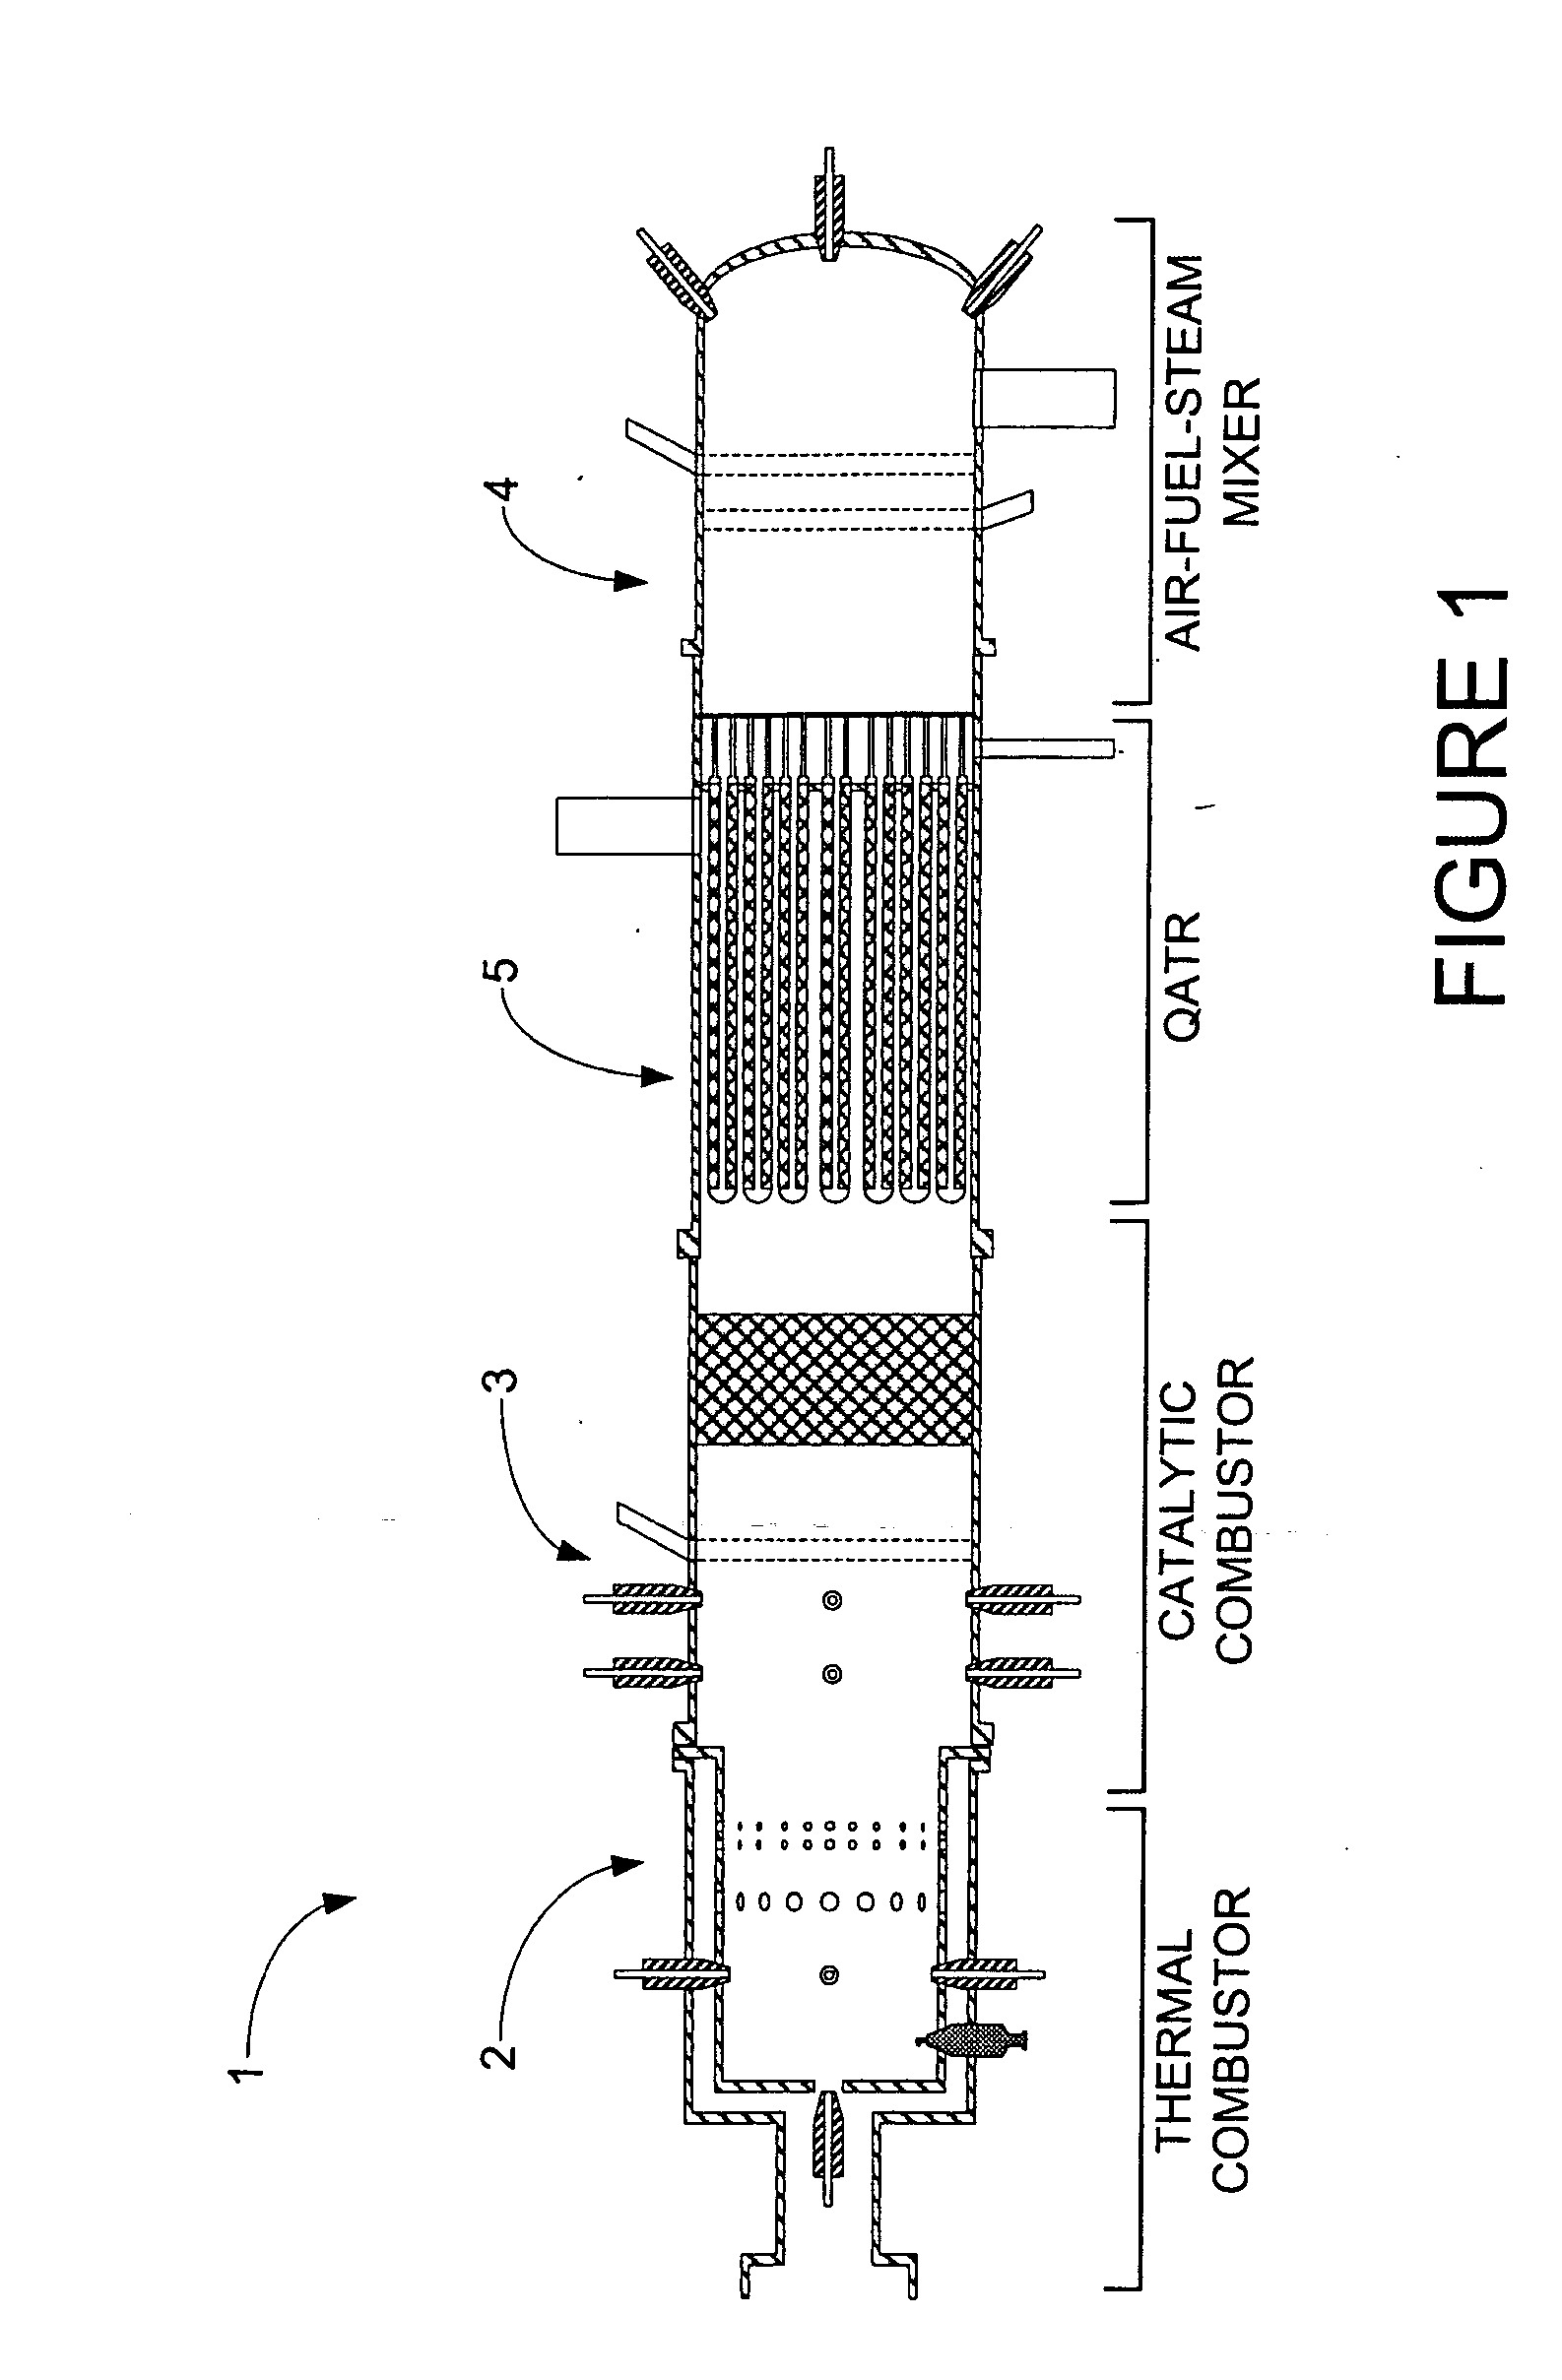 Integrated fuel processor subsystem with quasi-autothermal reforming